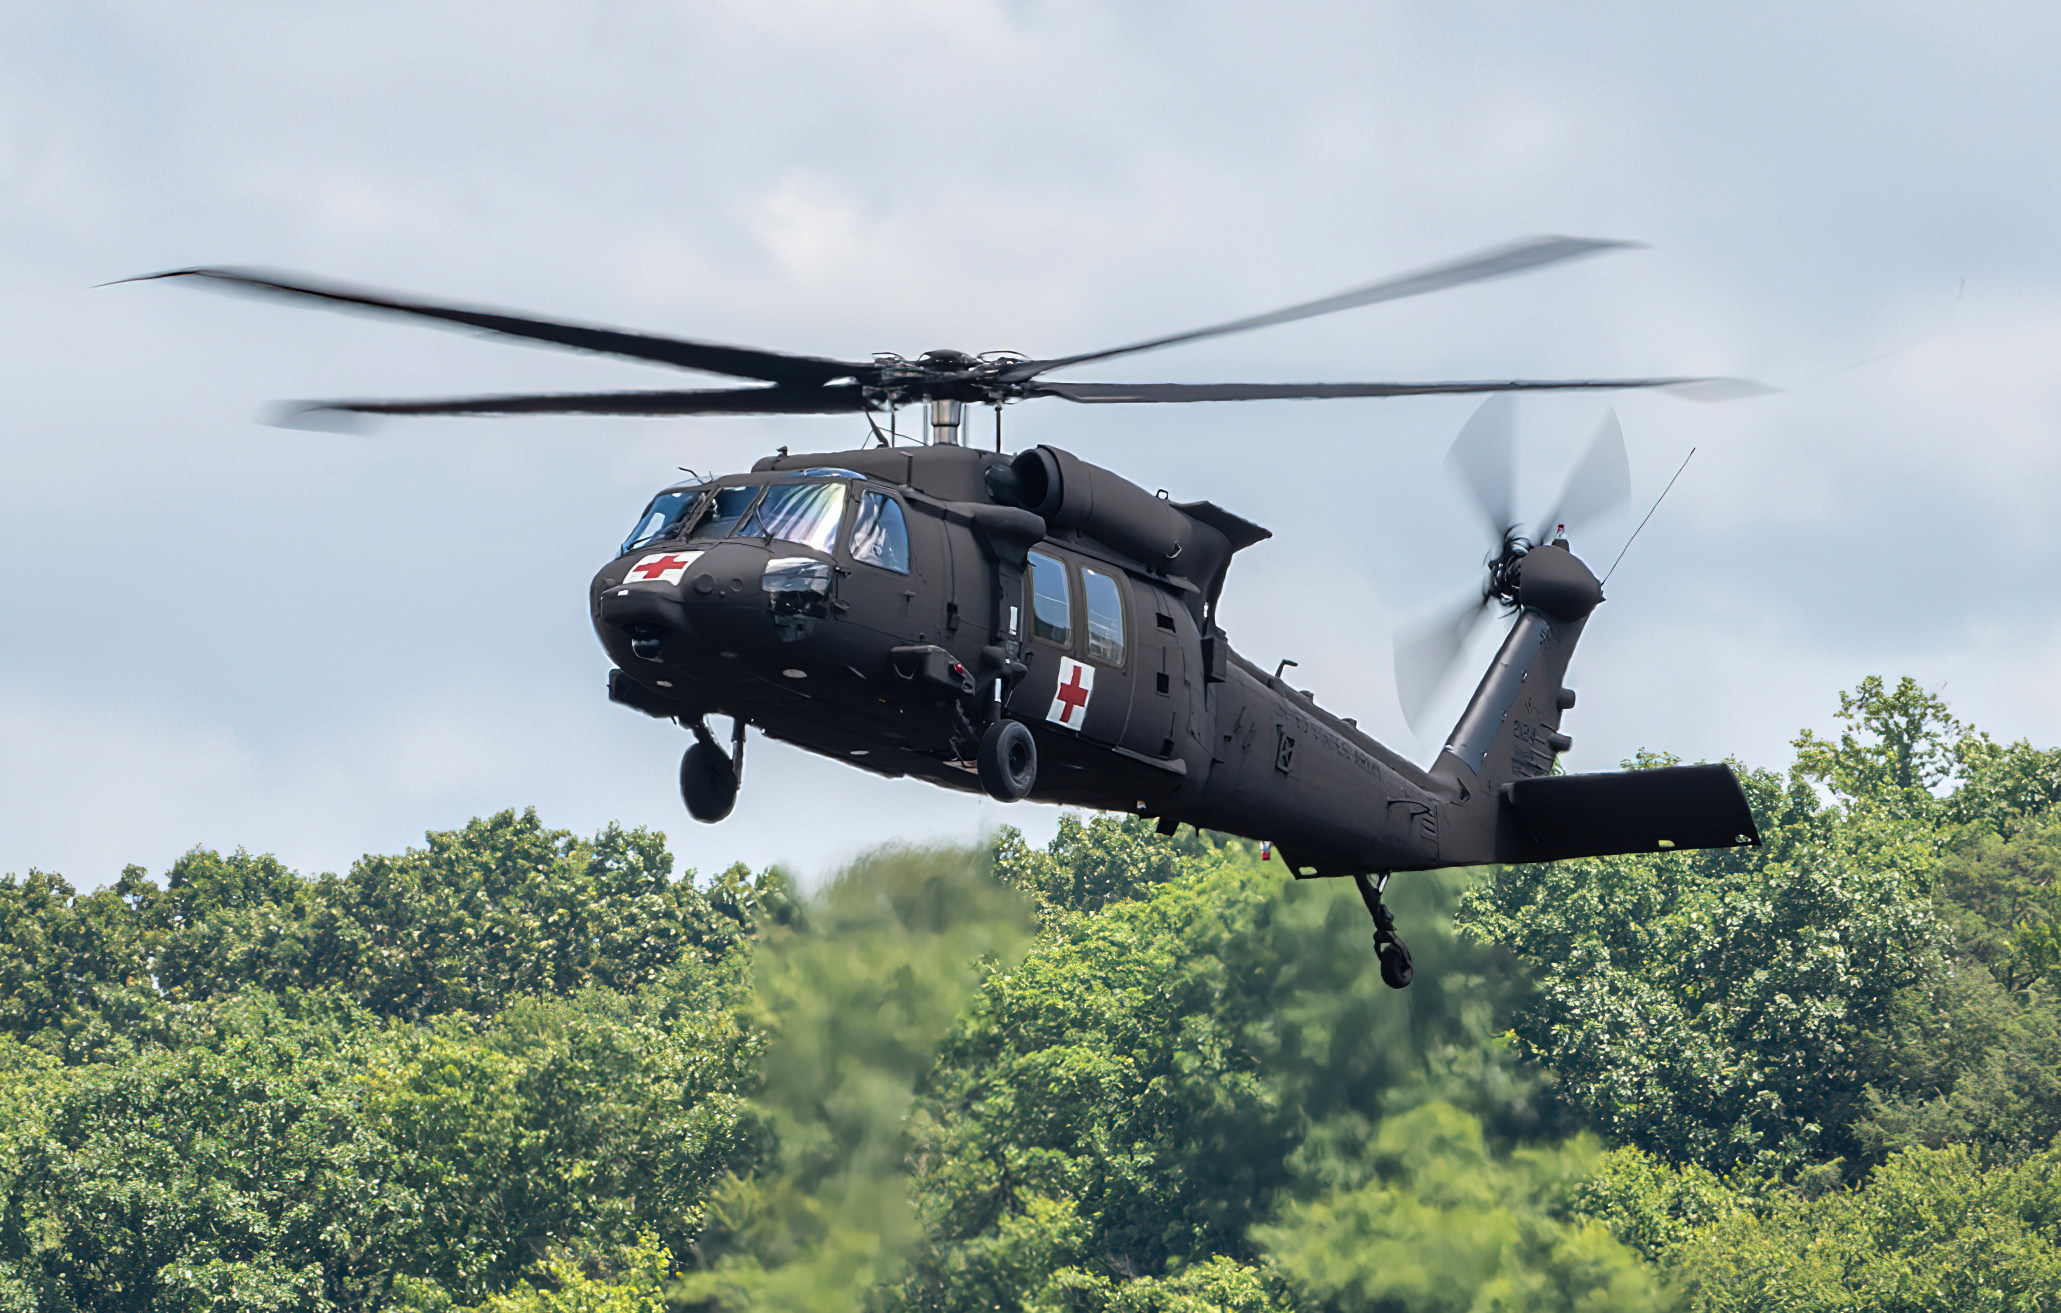 An HH-60M MEDEVAC takes flight at Sikorsky’s headquarters in Stratford, Connecticut. Sikorsky continues to modernize and enhance the Black Hawk thanks to a hot production line, mature well-established supply chain and digital factory. Photo courtesy Sikorsky, a Lockheed Martin company.